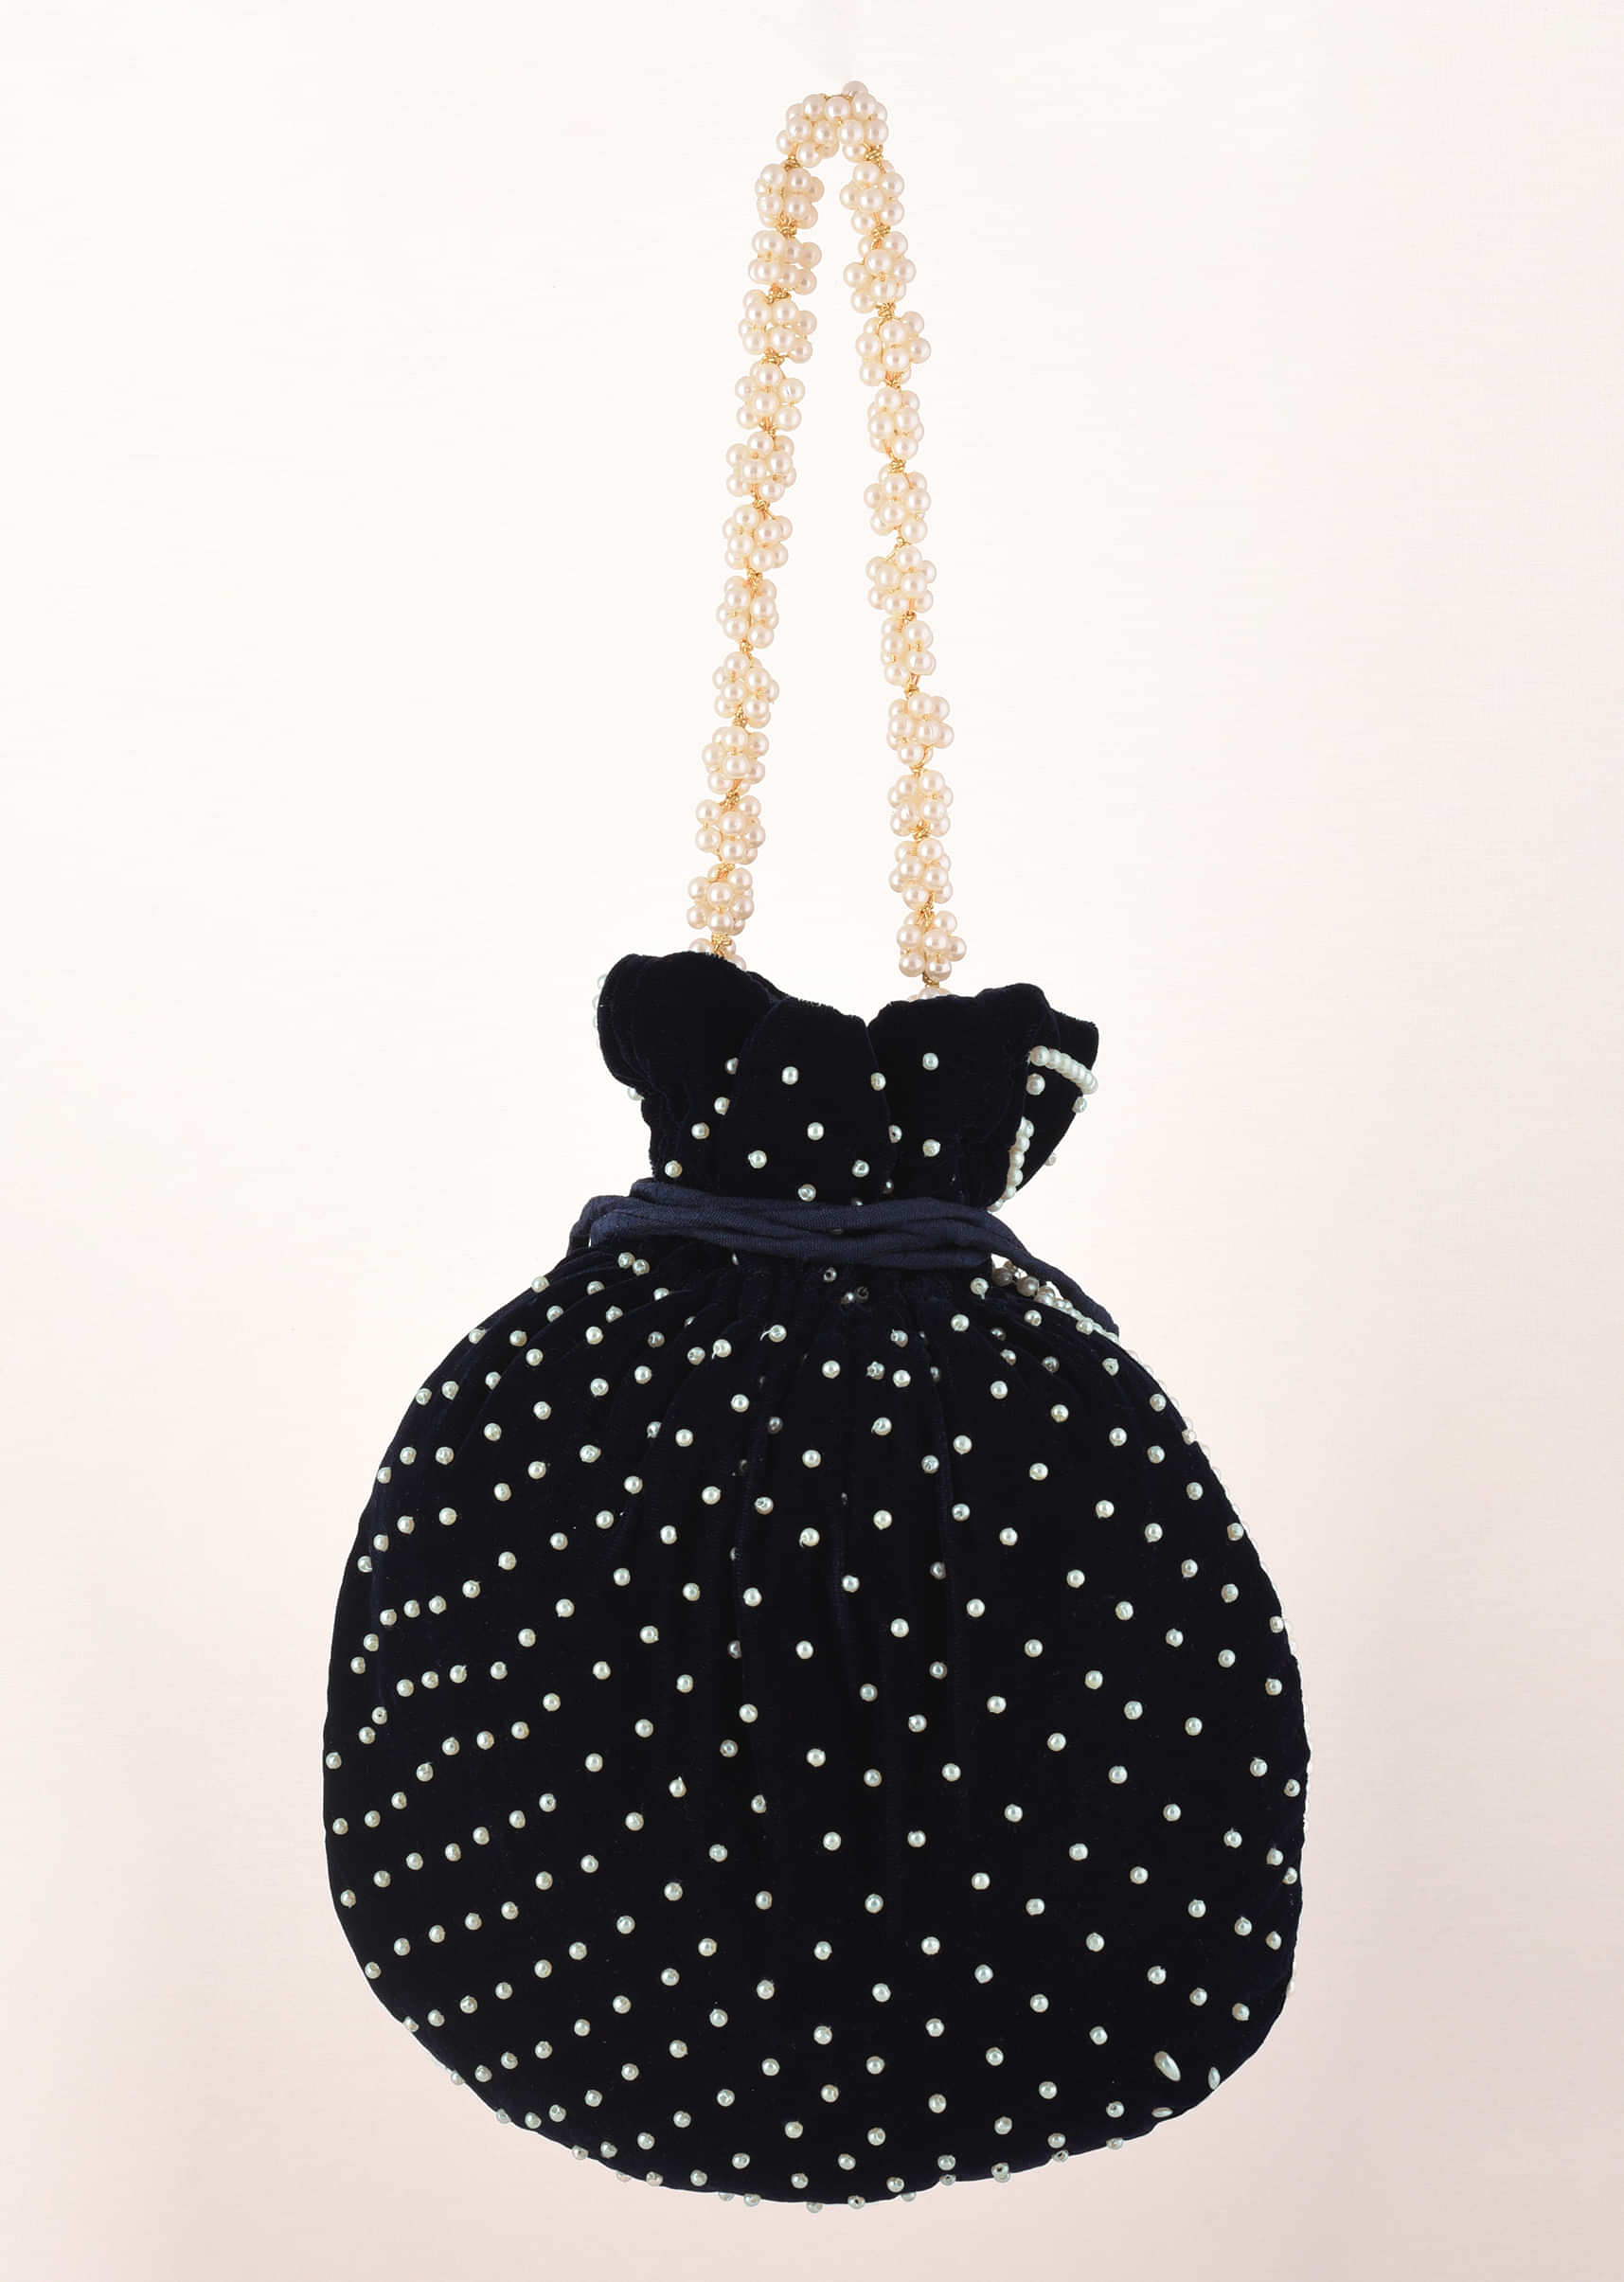 Navy Blue Potli Bag In Velvet With Moti Work In Crescent Design Along The Edge And Scattered In The Centre By Shubham